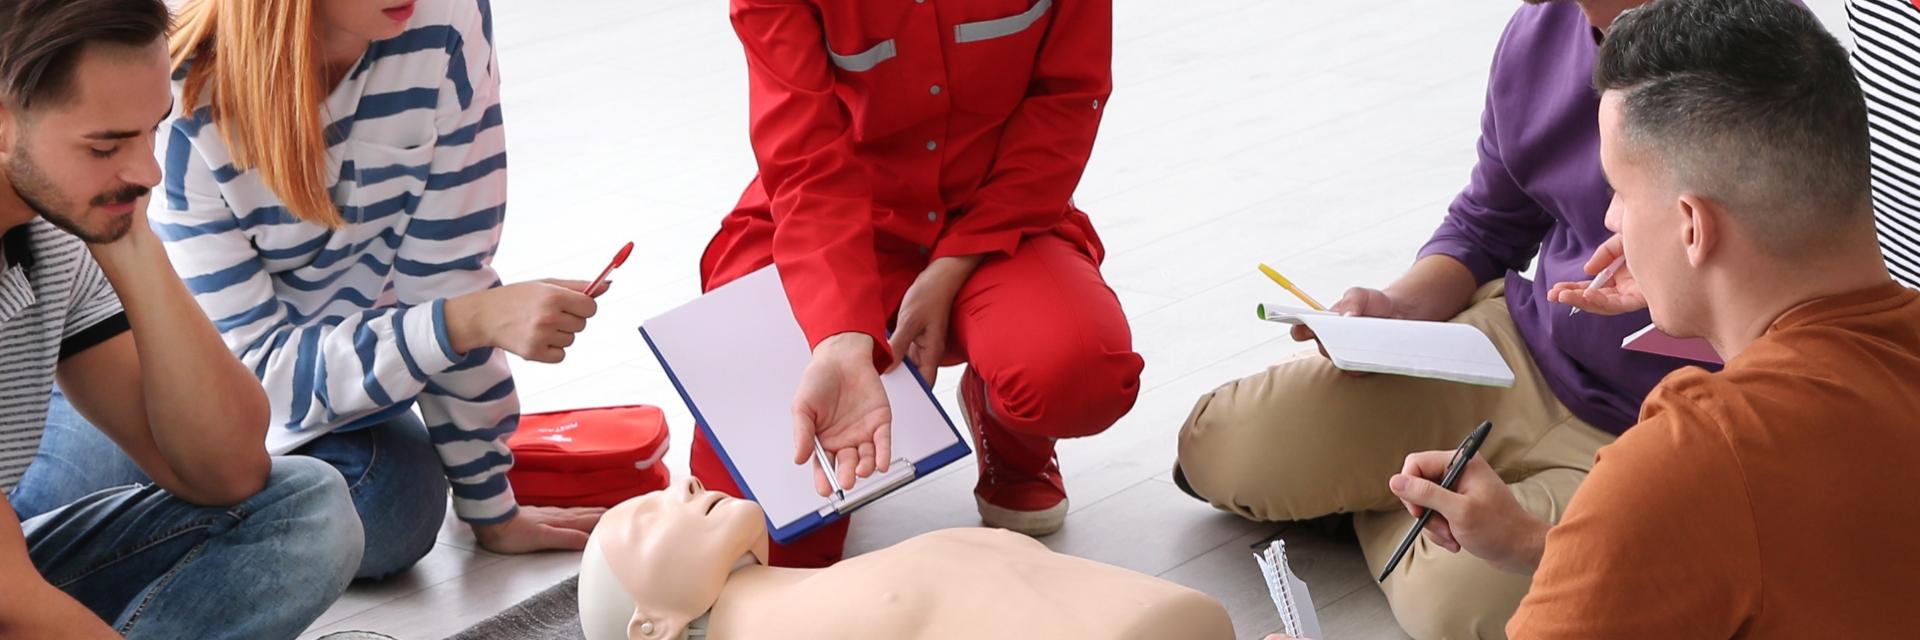 cemec-sanmarino en adult-first-aid-course-blsd-basic-life-support 004